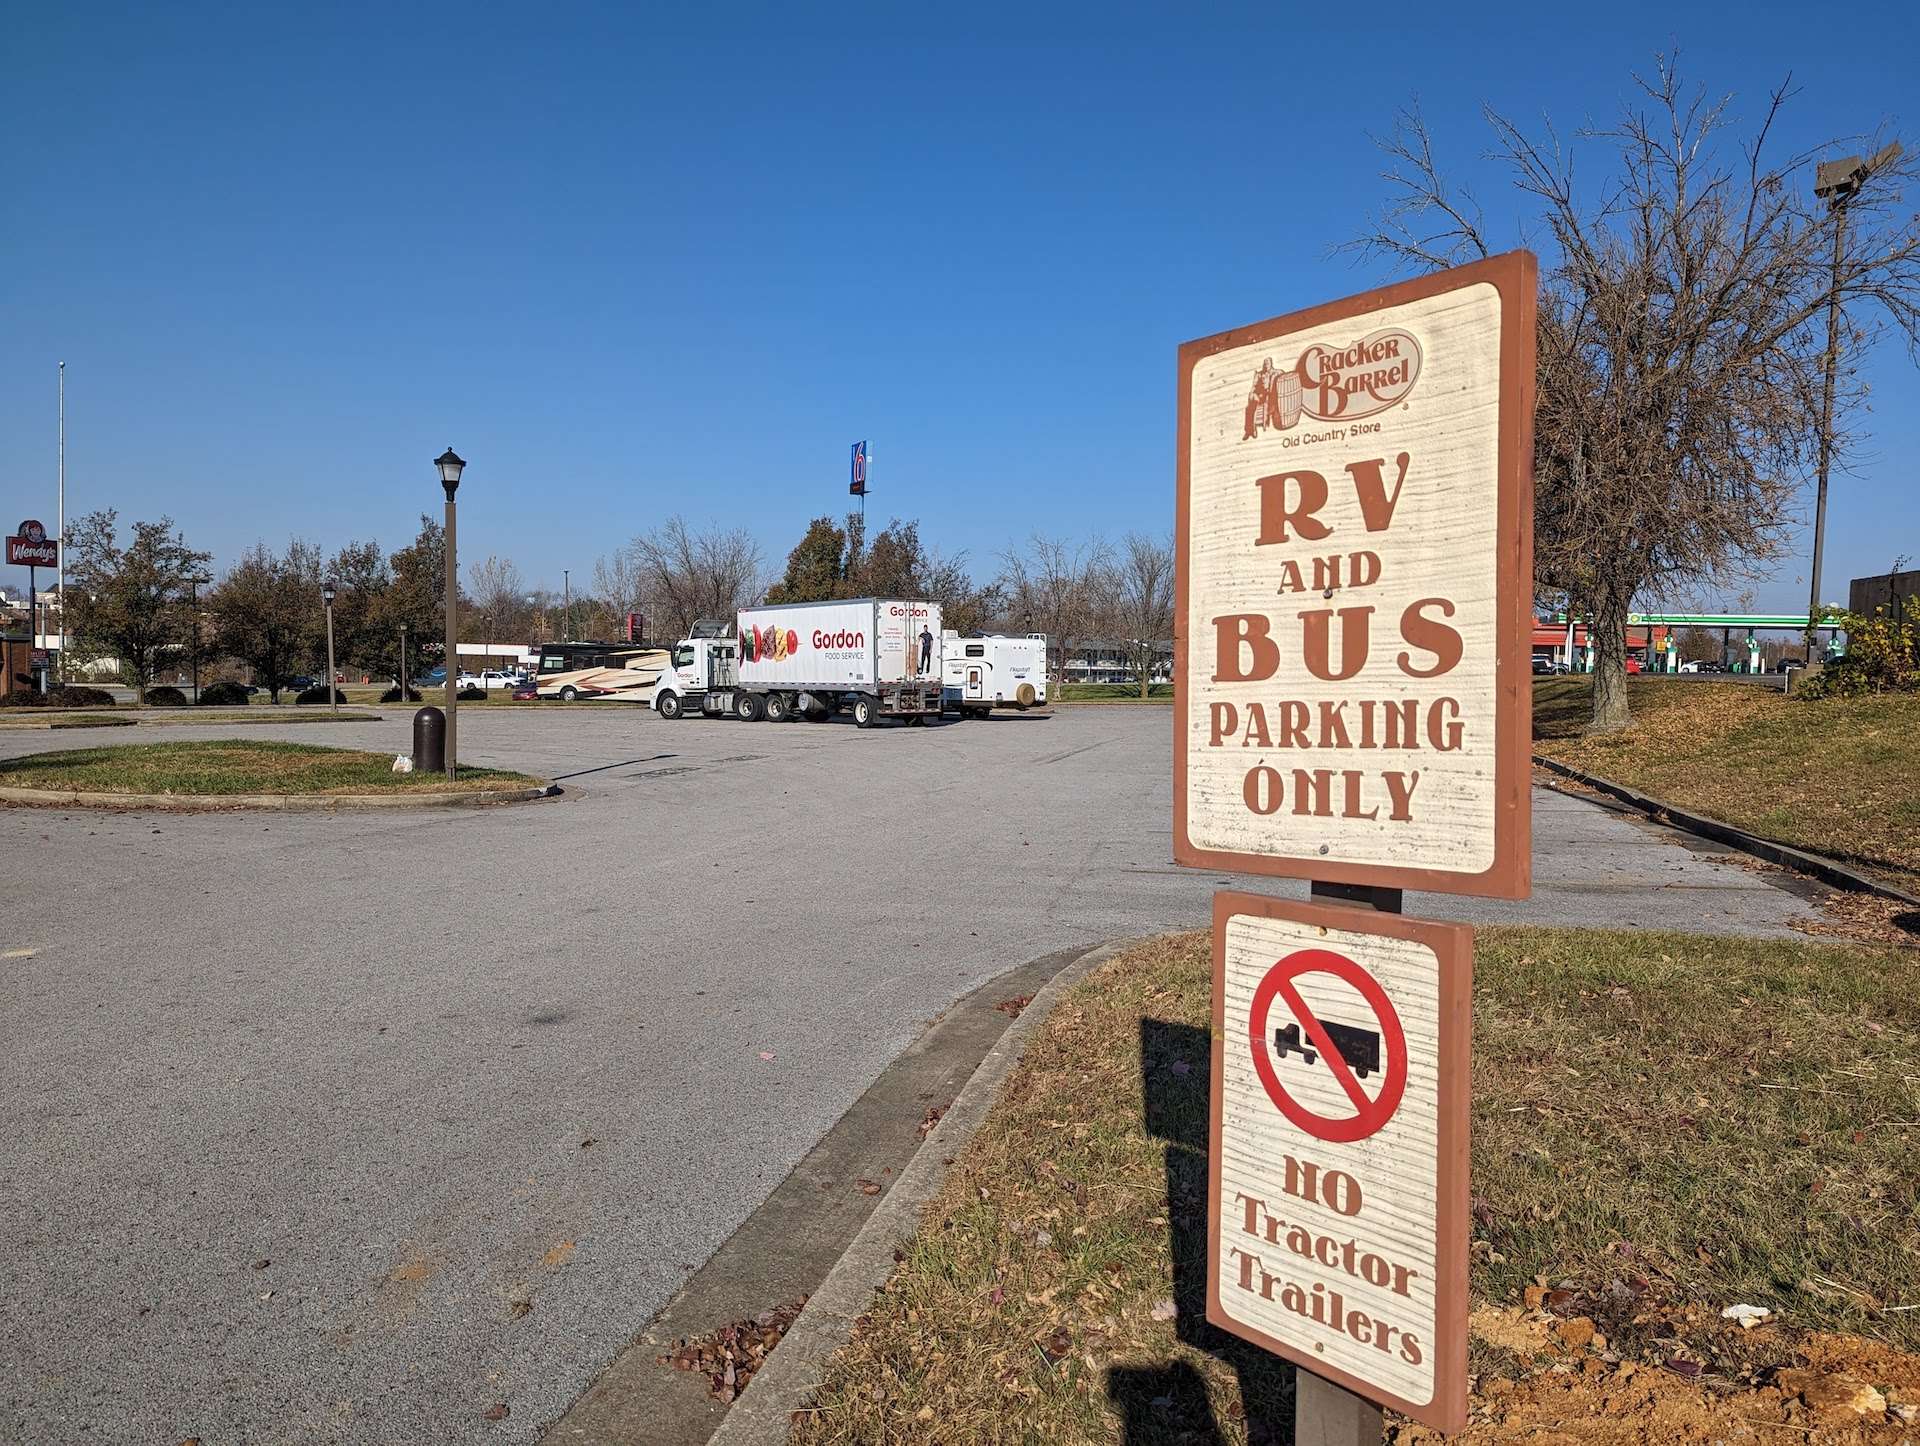 Cracker Barrel overnight parking sign for RV and Bus parking lot